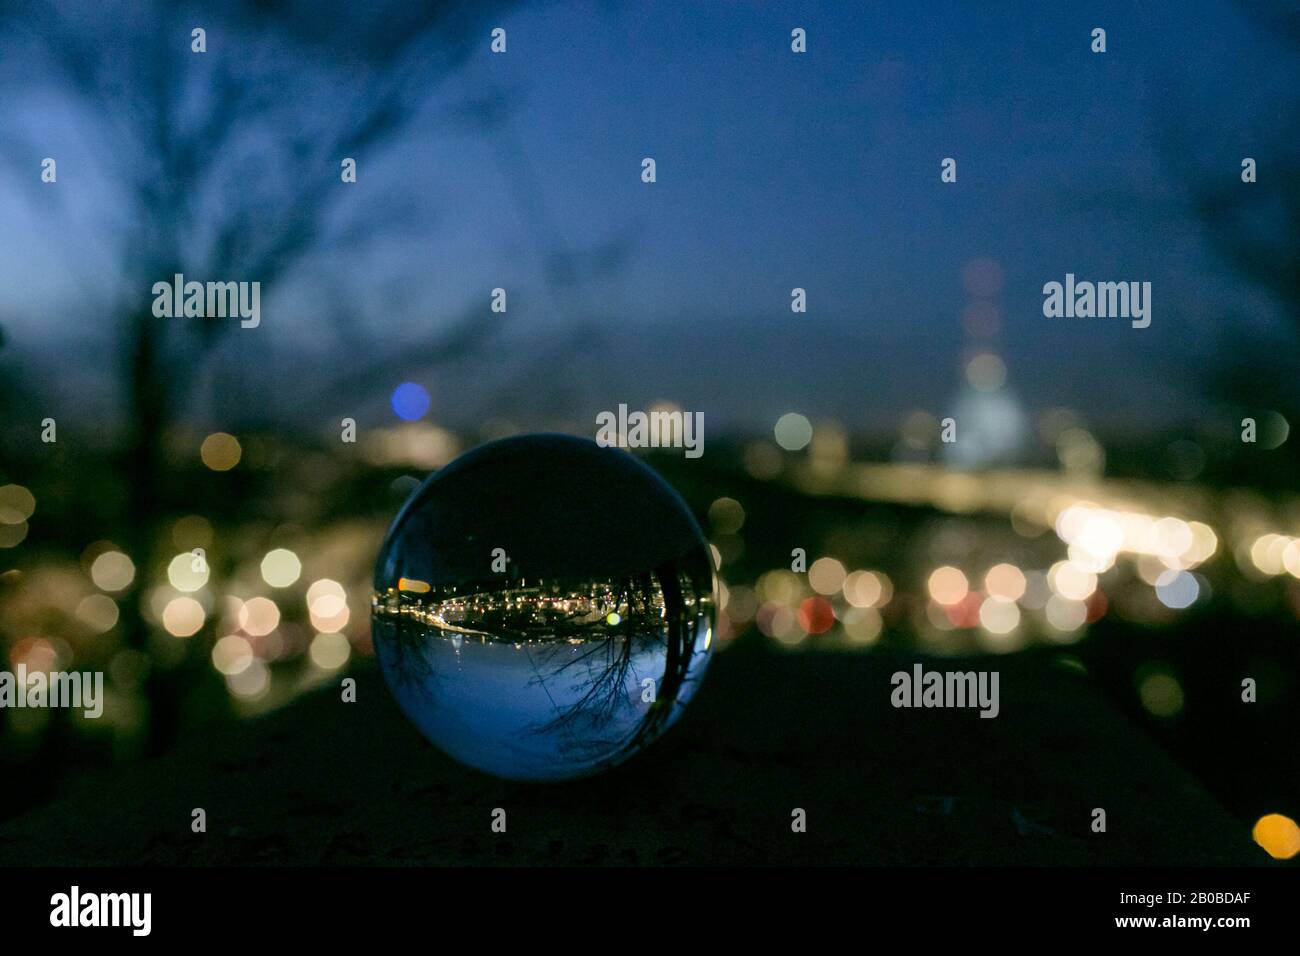 Turin from above, seen through the glass sphere Stock Photo